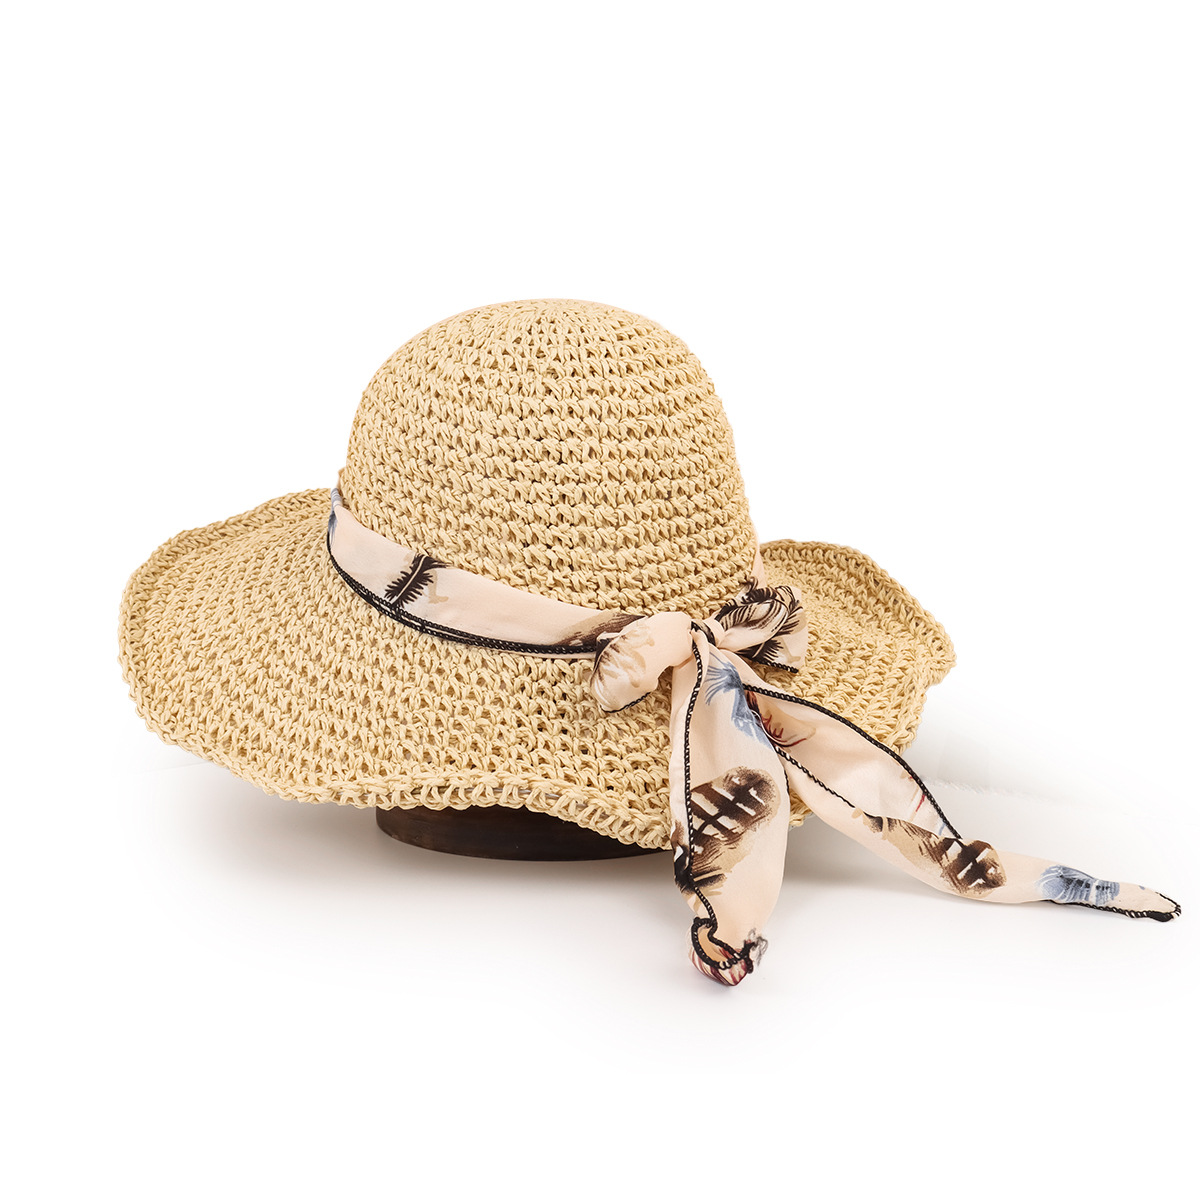 widebrimmed sunshade korean style straw hat wholesale Nihaojewelrypicture3